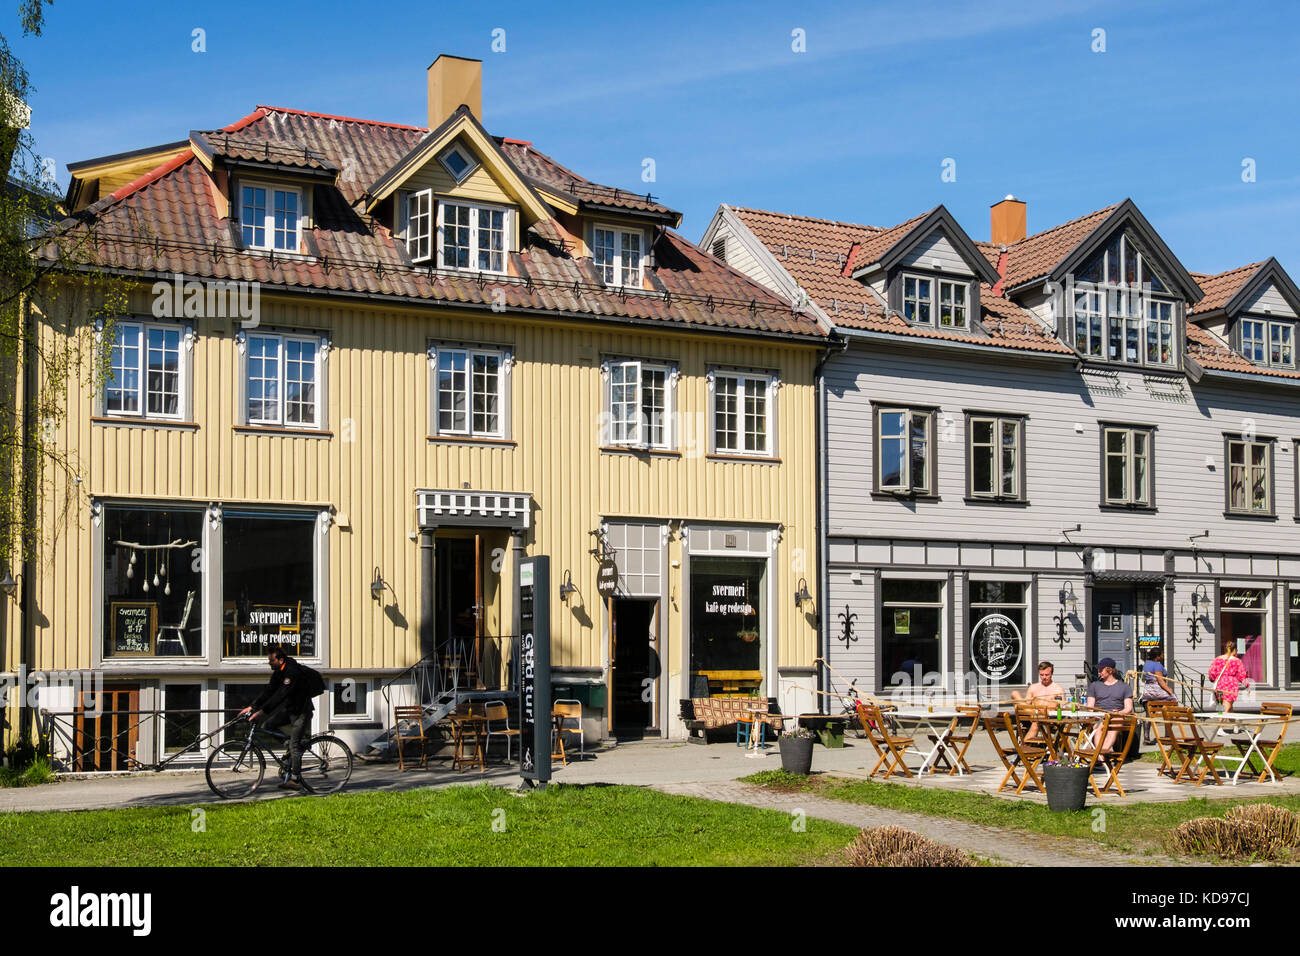 Street cafe and wooden Norwegian buildings with people outside enjoying sunshine in city centre in summer. Tromso, Troms county, Norway, Scandinavia Stock Photo